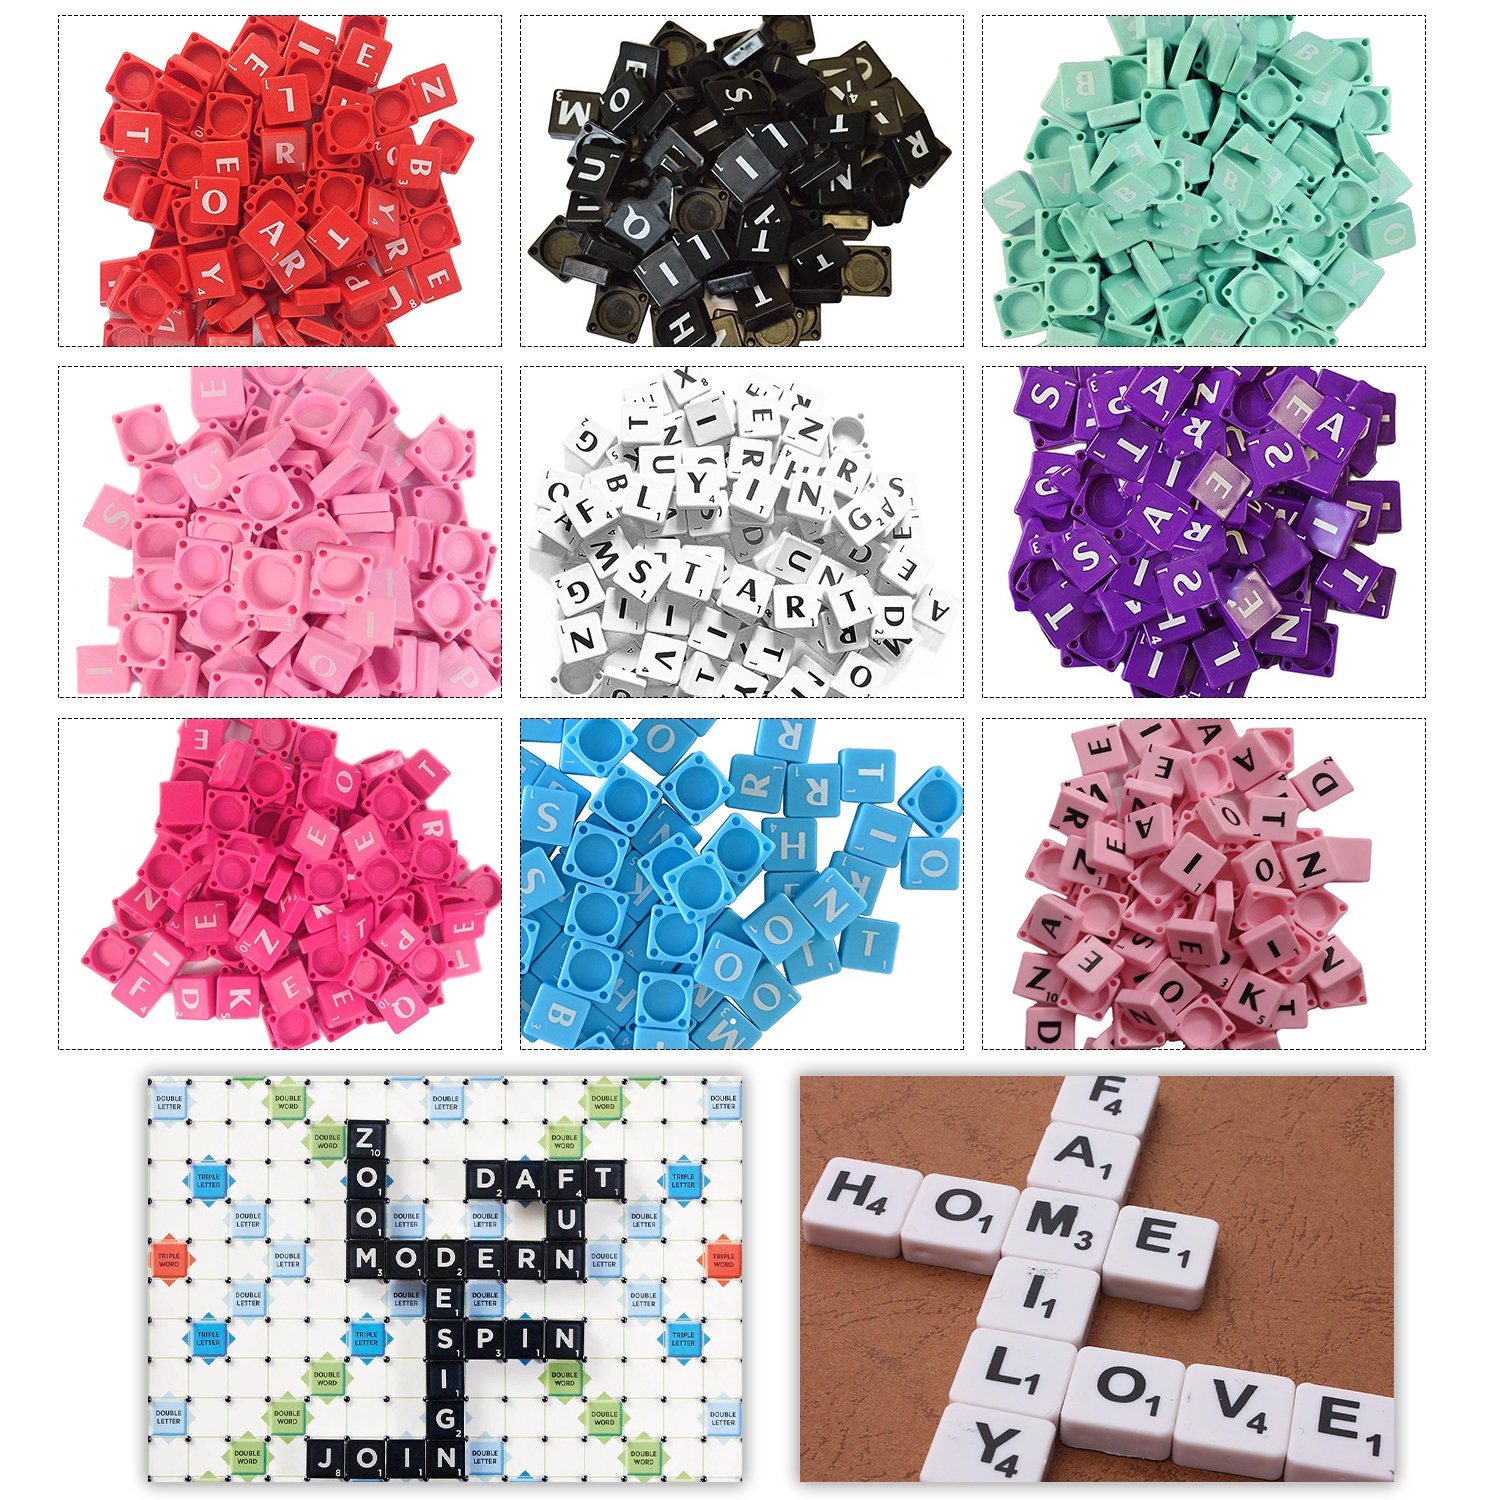 250 Vintage Letters, Scrabble Letters, Letter Tiles, Game Pieces Mix, Bulk  Game Pieces for Scrapbooking Collage and Journaling 